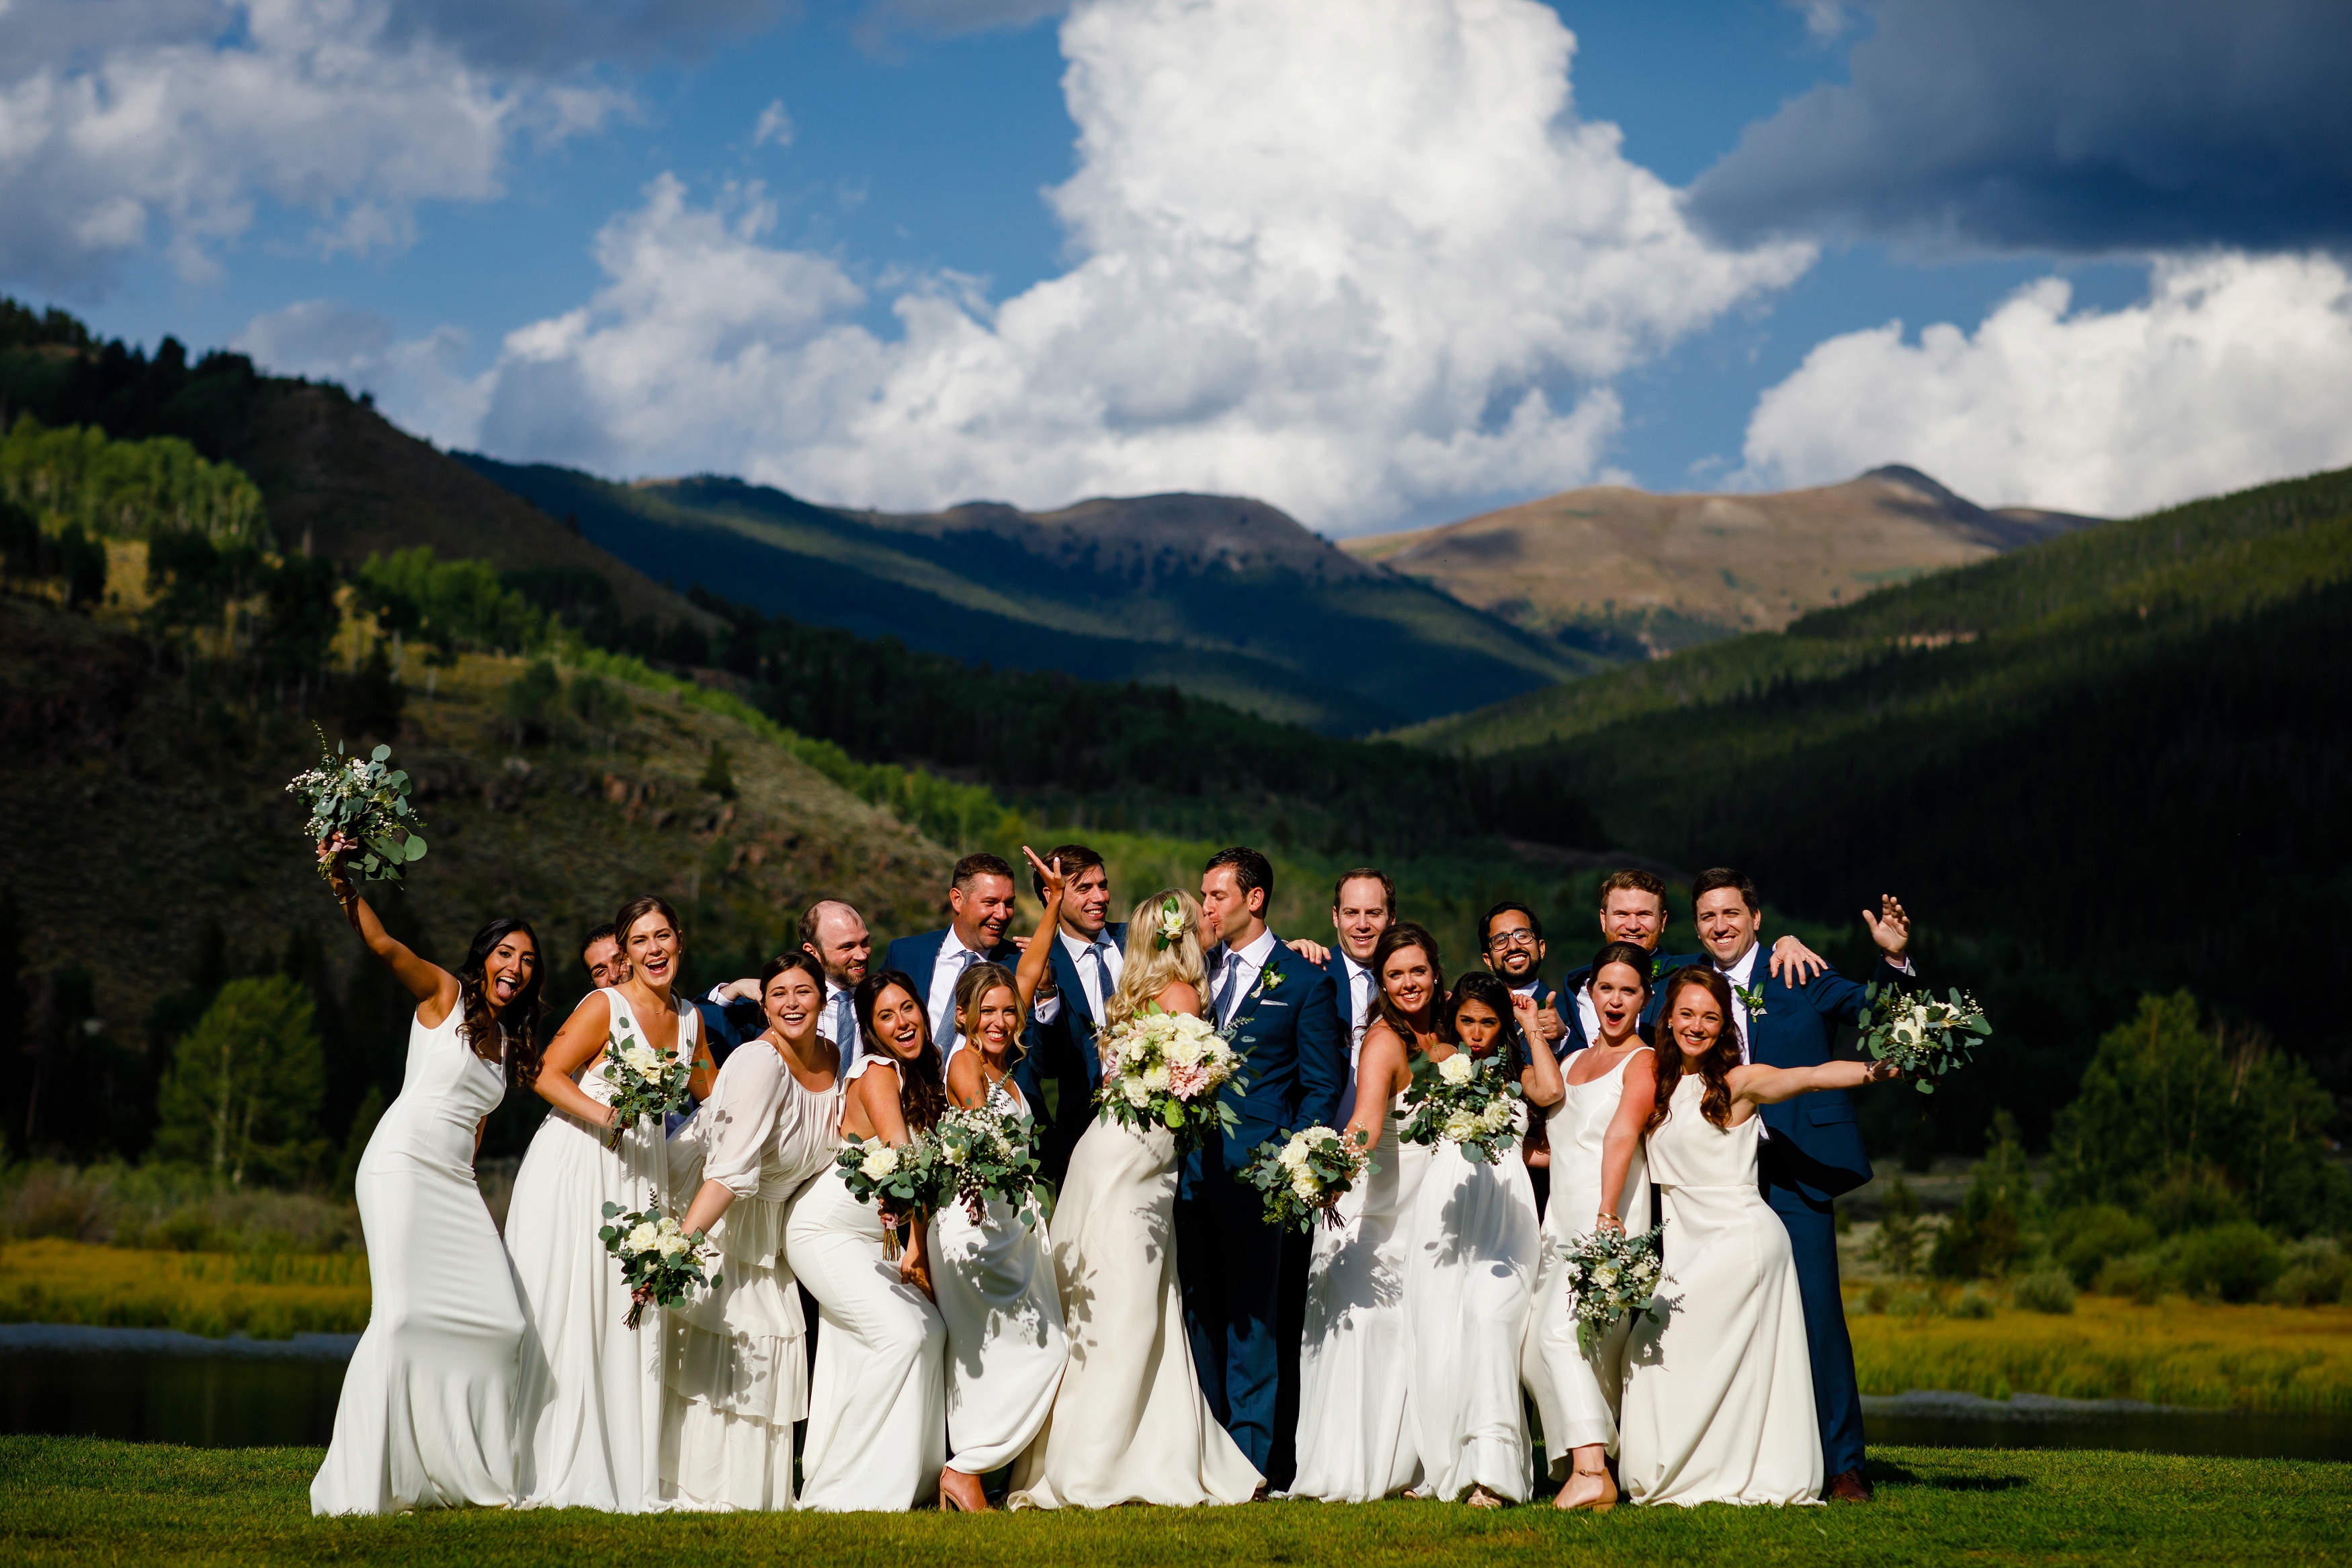 The entire wedding party celebrating Josh & Fabiana's marriage shortly after their ceremony on the ponds at Camp Hale.